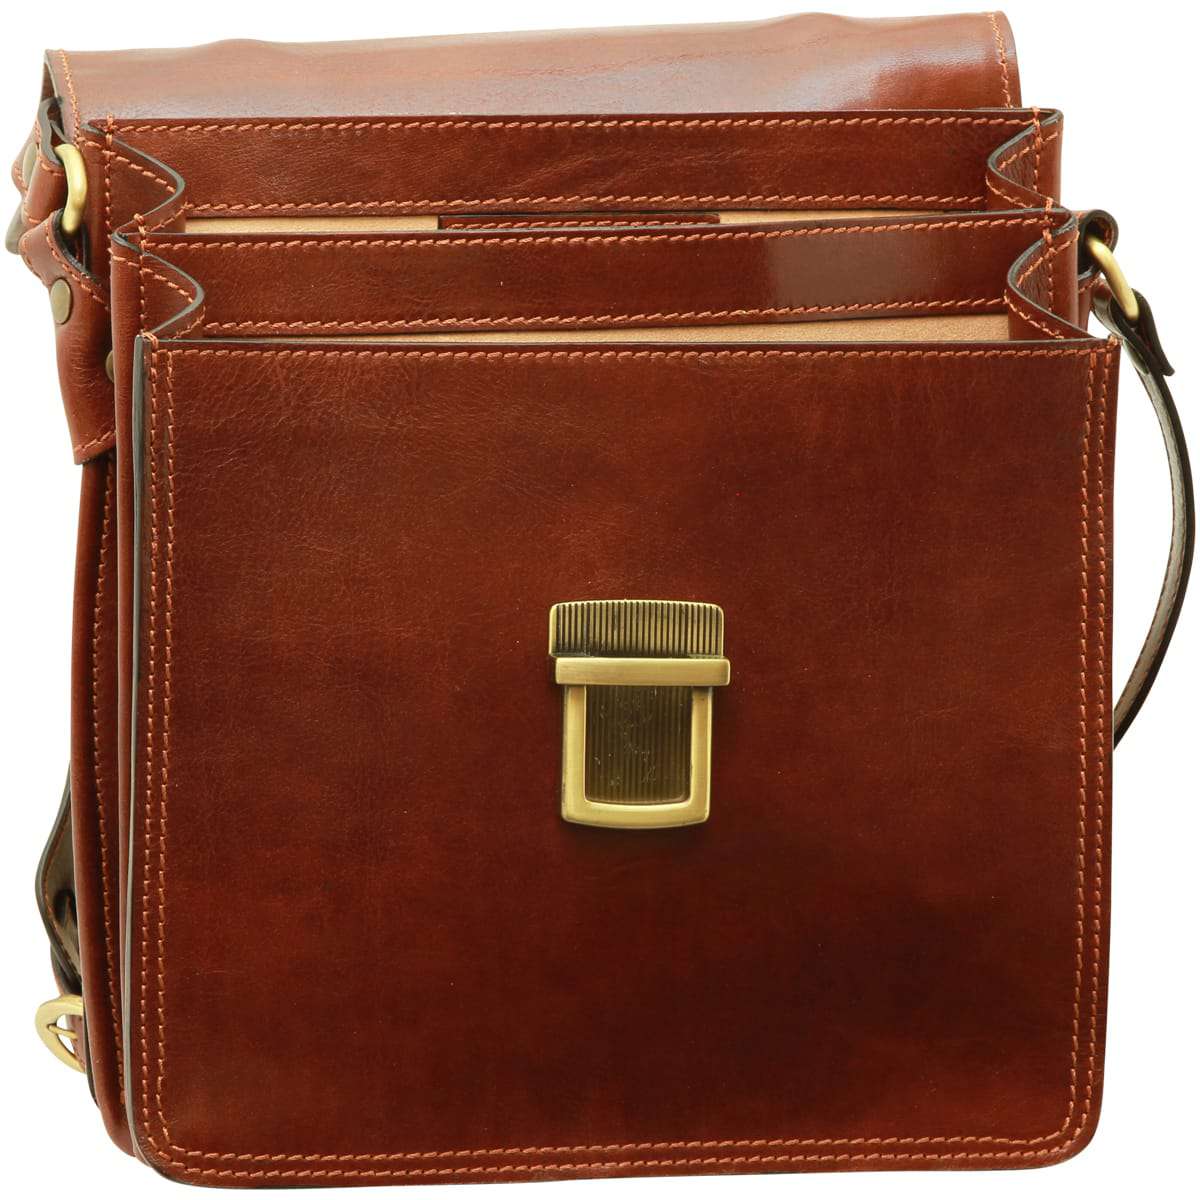 Leather Cross Body Satchel Bag - Brown | 056505MA US | Old Angler Firenze